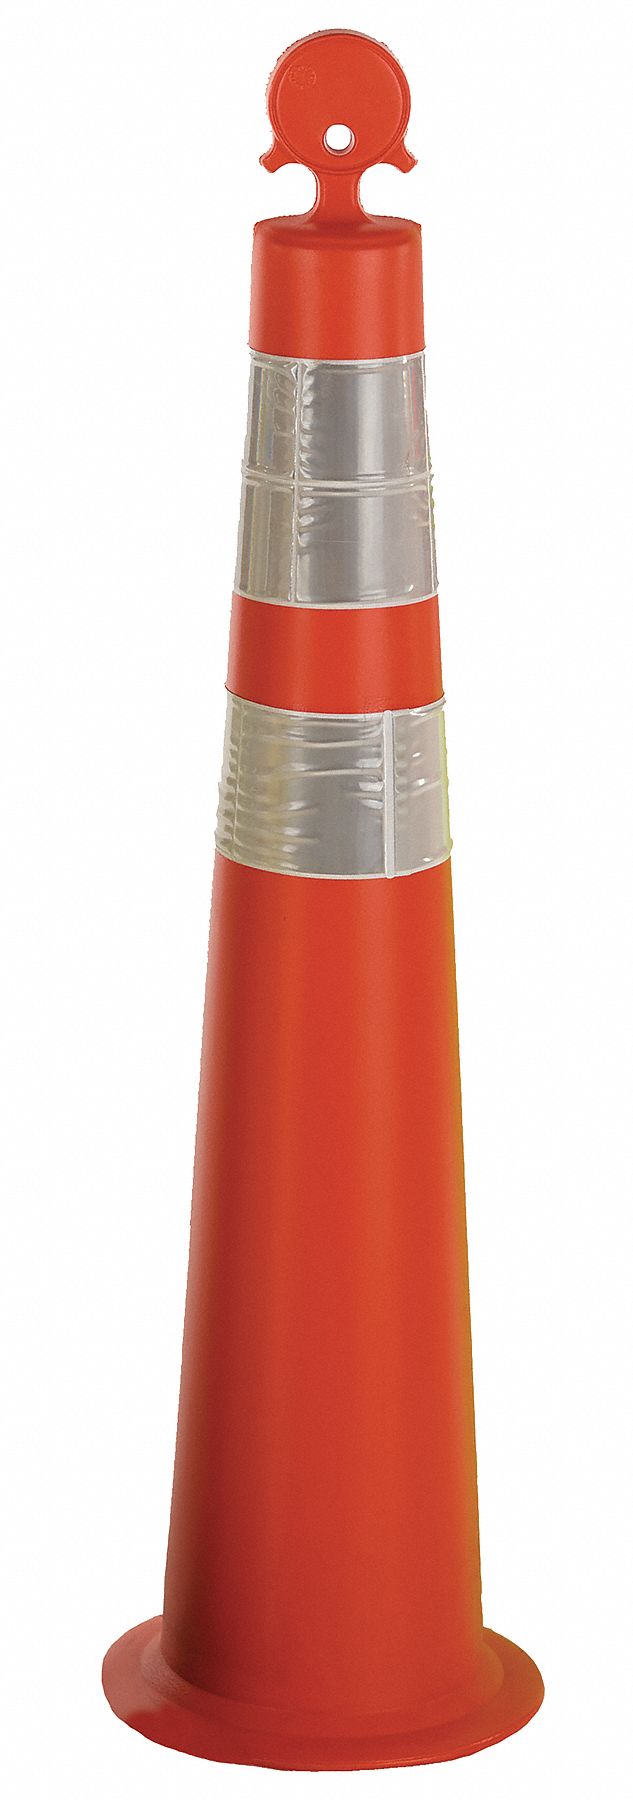 35KJ25 - Channelizer Cone with Collar 36inH Ornge